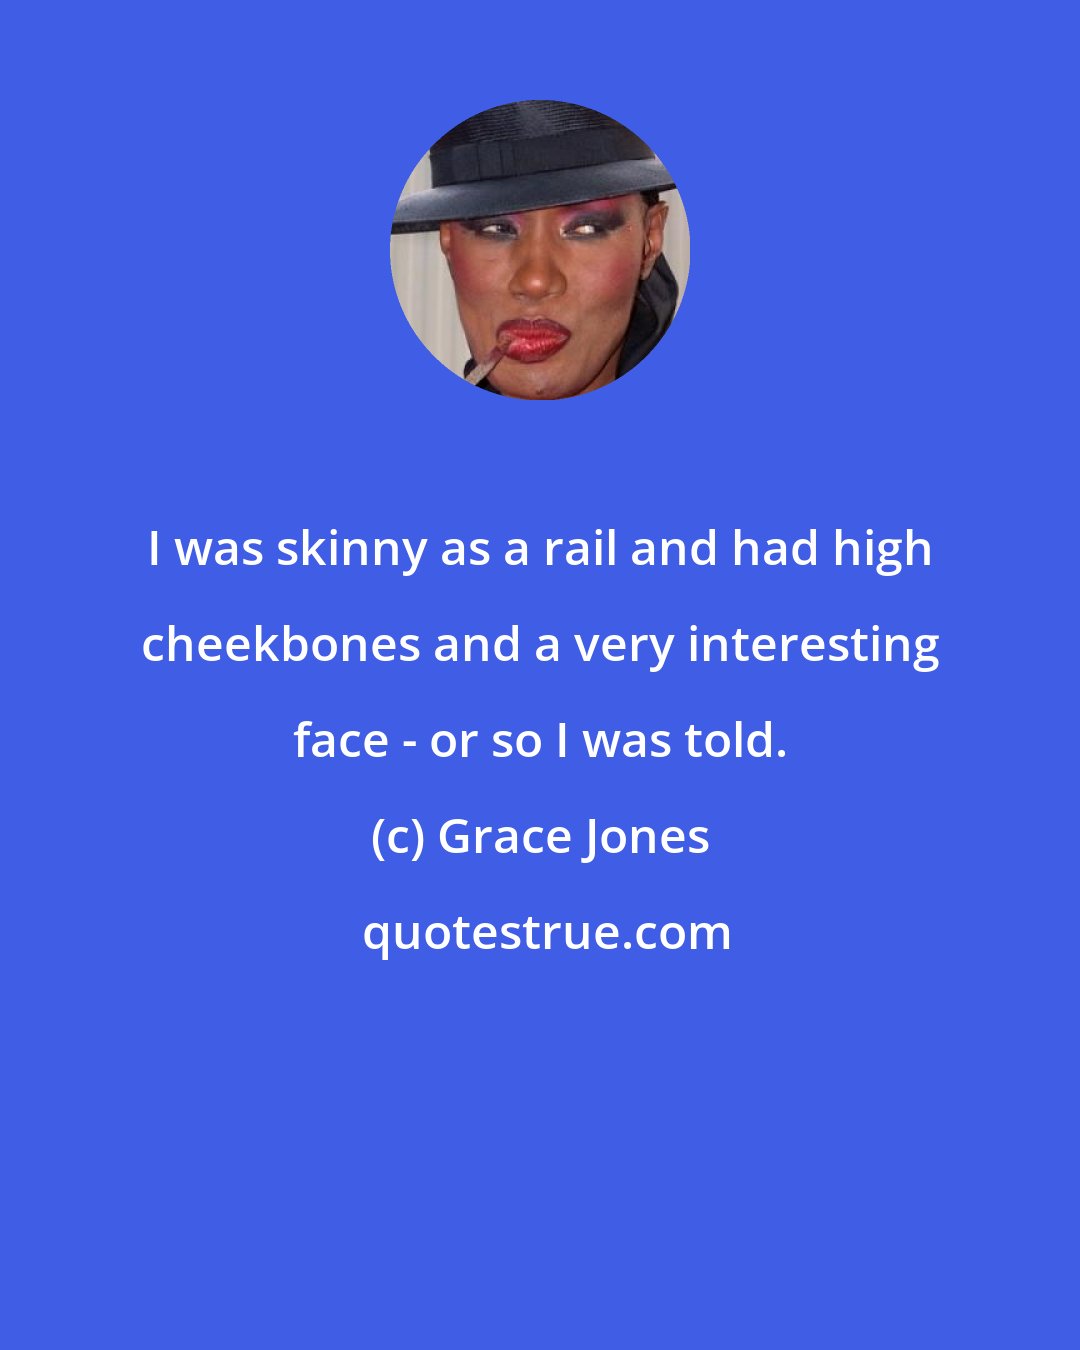 Grace Jones: I was skinny as a rail and had high cheekbones and a very interesting face - or so I was told.